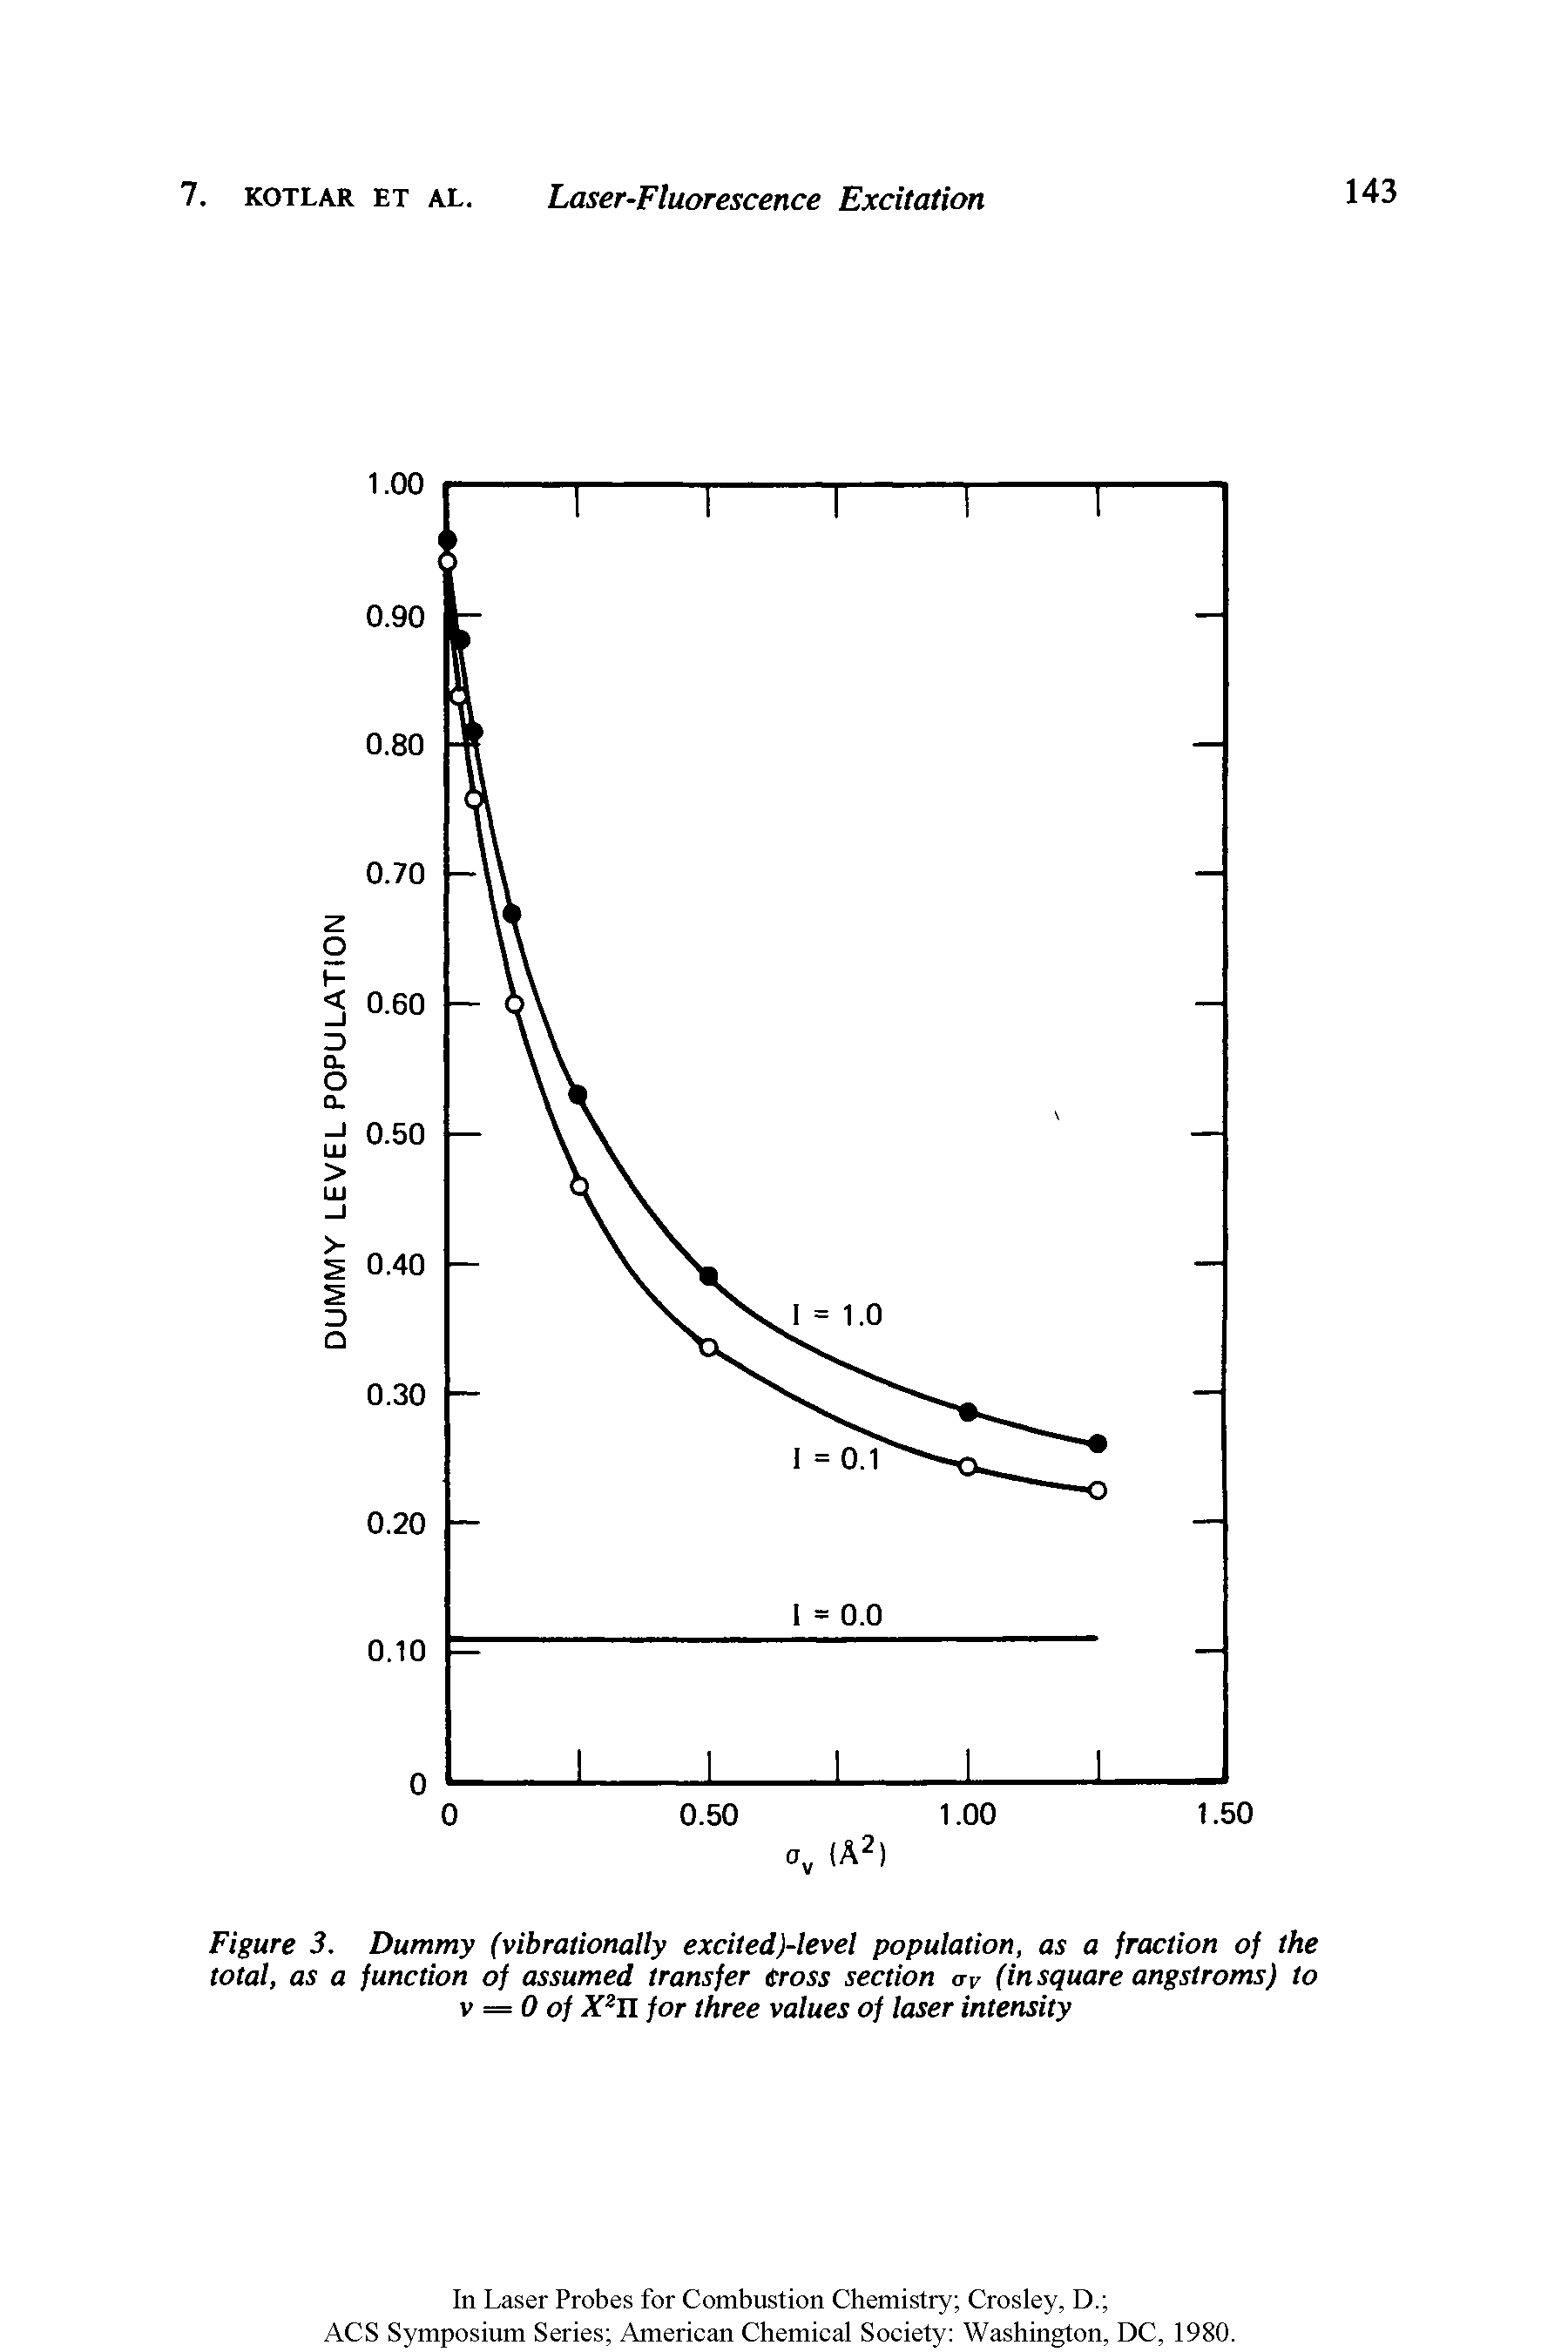 Figure 3. Dummy (vibrationally excited)-level population, as a fraction of the total, as a function of assumed transfer Cross section av (insquare angstroms) to v = 0 of X2H for three values of laser intensity...